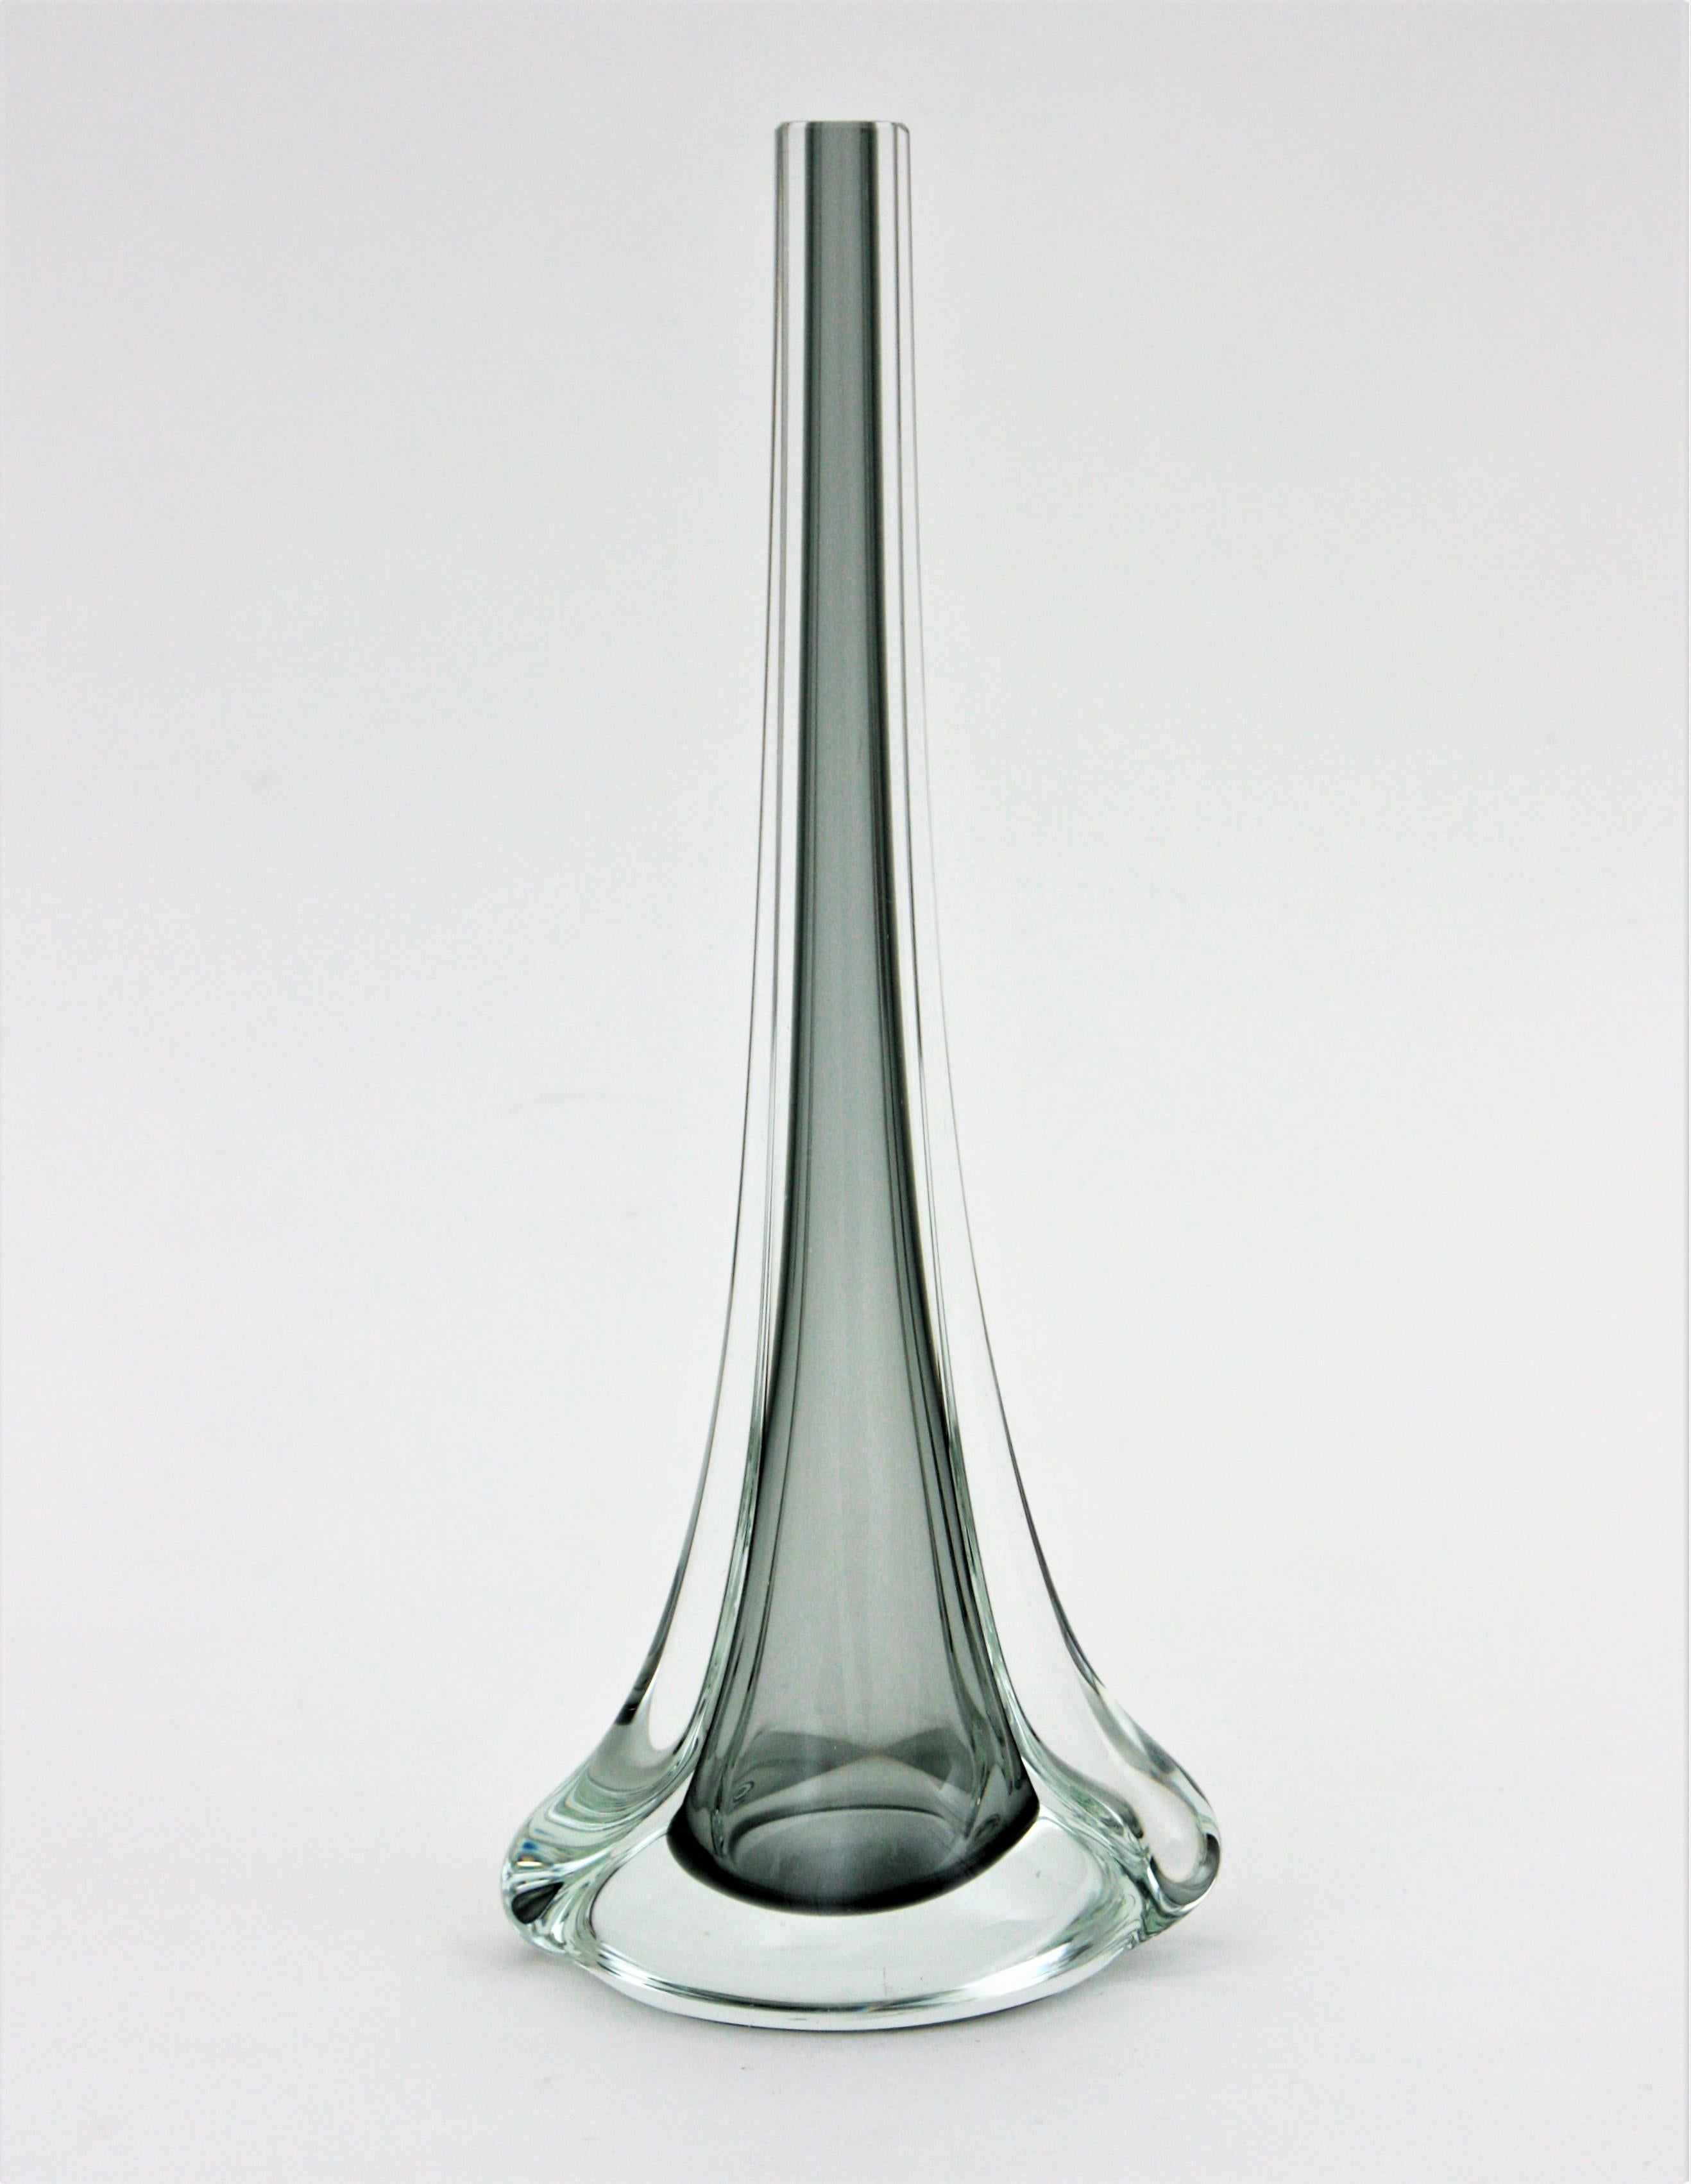 Lovely one-flower handblown Sommerso smoked grey and clear Murano glass vase. Attributed to Flavio Poli for Seguso Vetri d'Arte. Italy, 1950s.
This eye-catching vase with tall neck is made of grey glass submerged into clear glass.
Use it as single